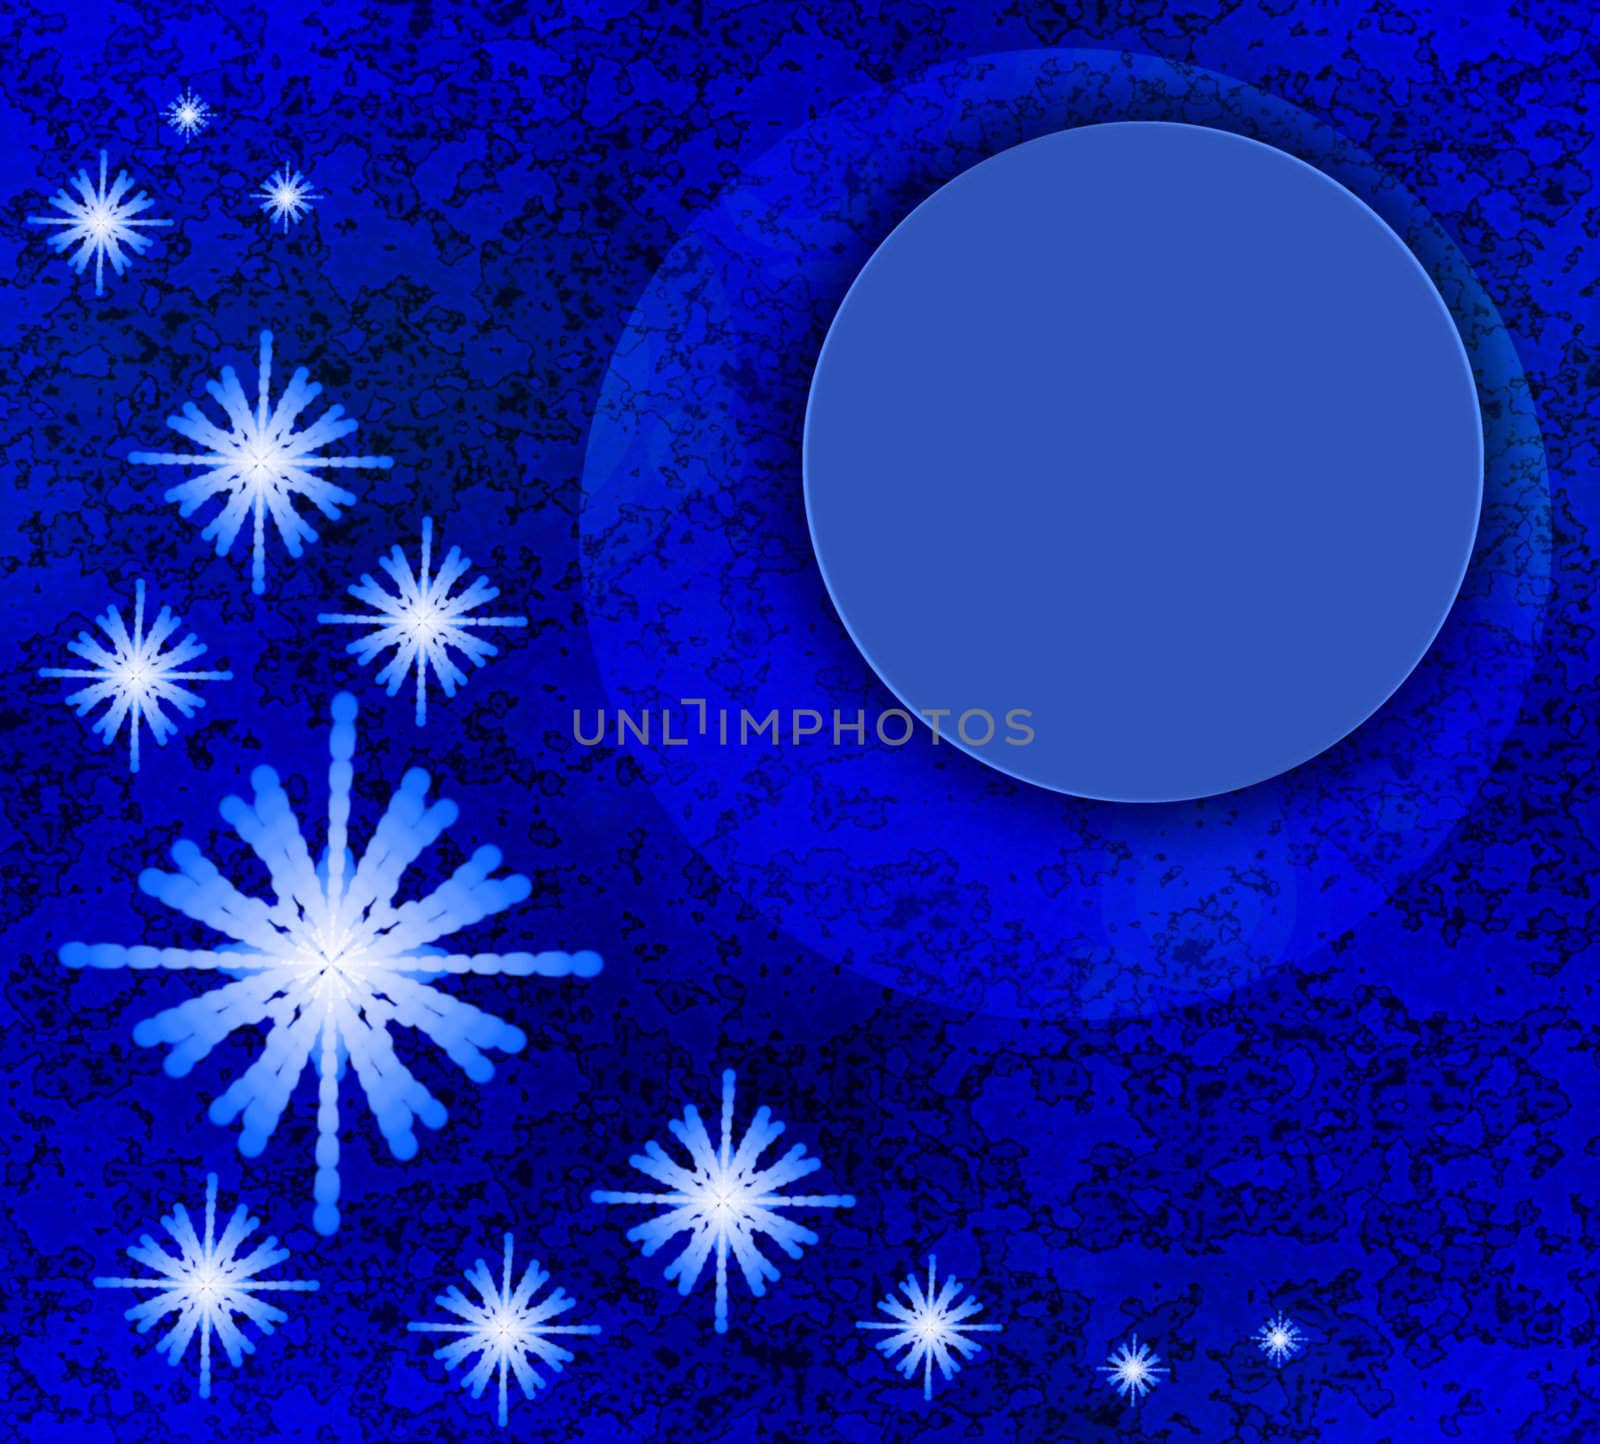 abstract creative symbolic textured image of winter background with snowflakes